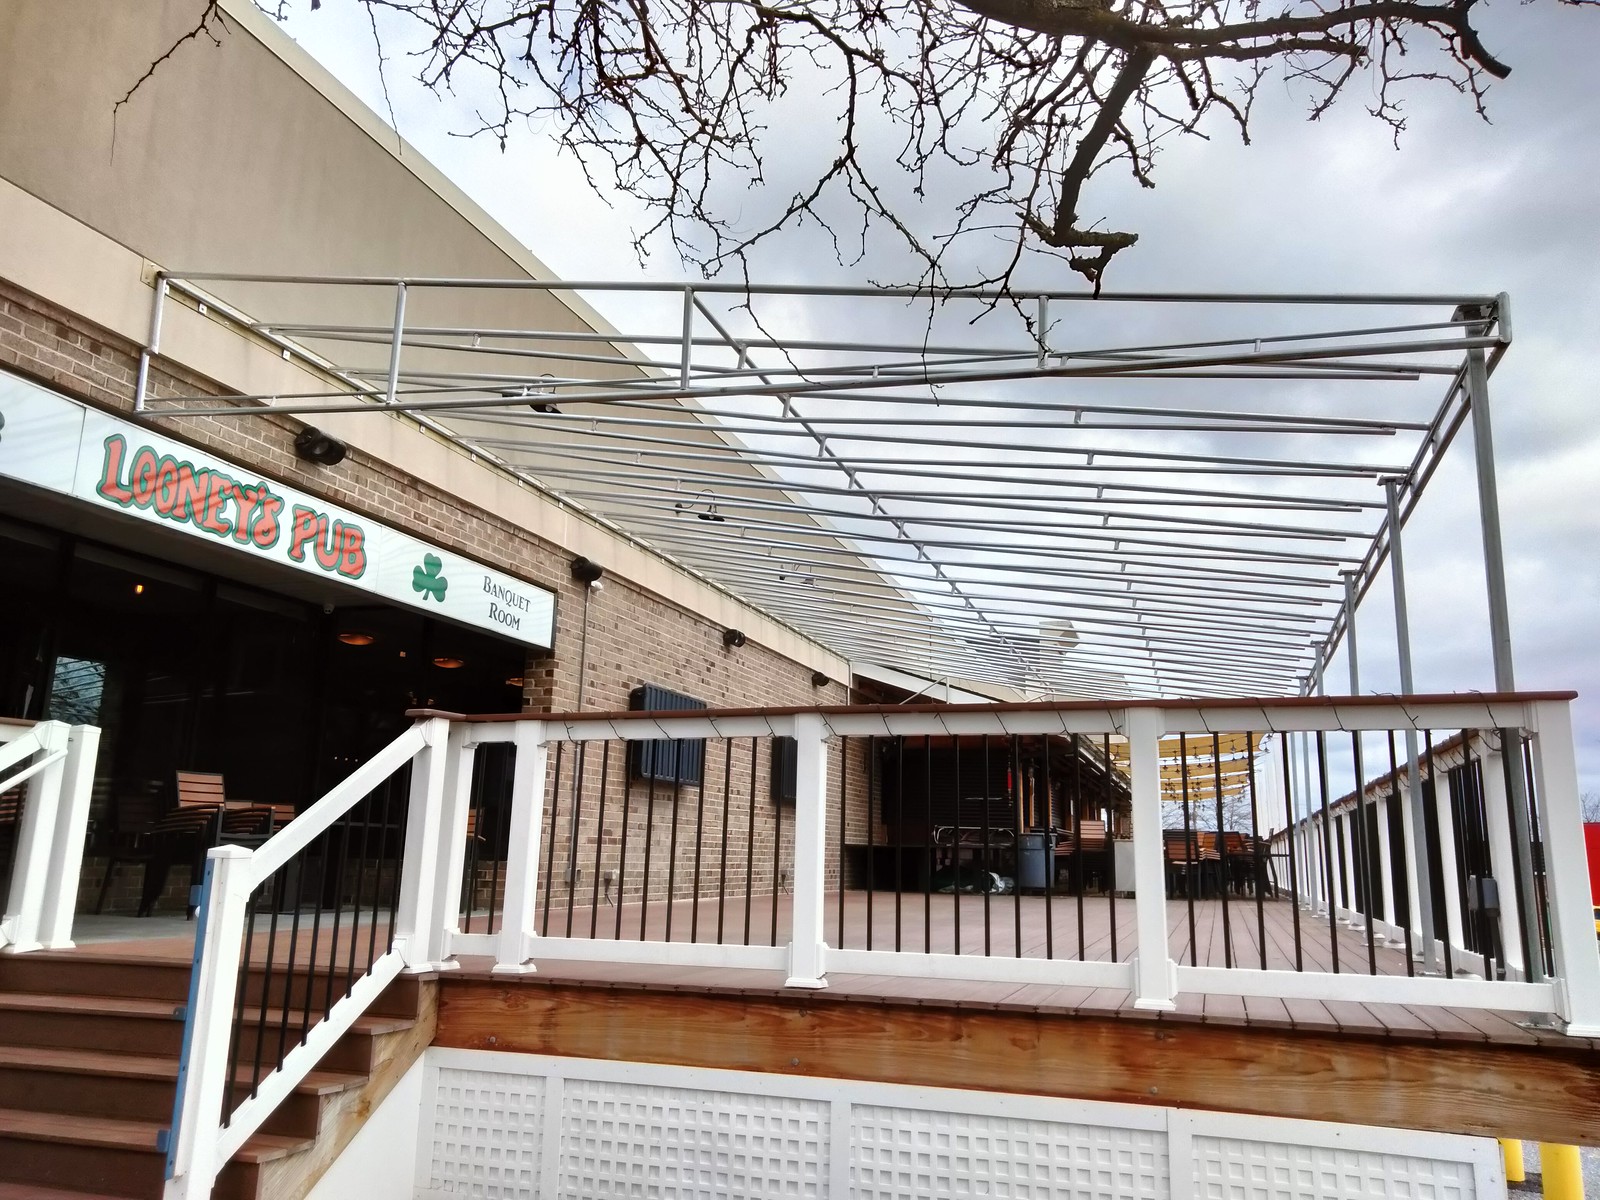 Large Welded Frame for Restaurant Patio Awning-Hoffman Awning